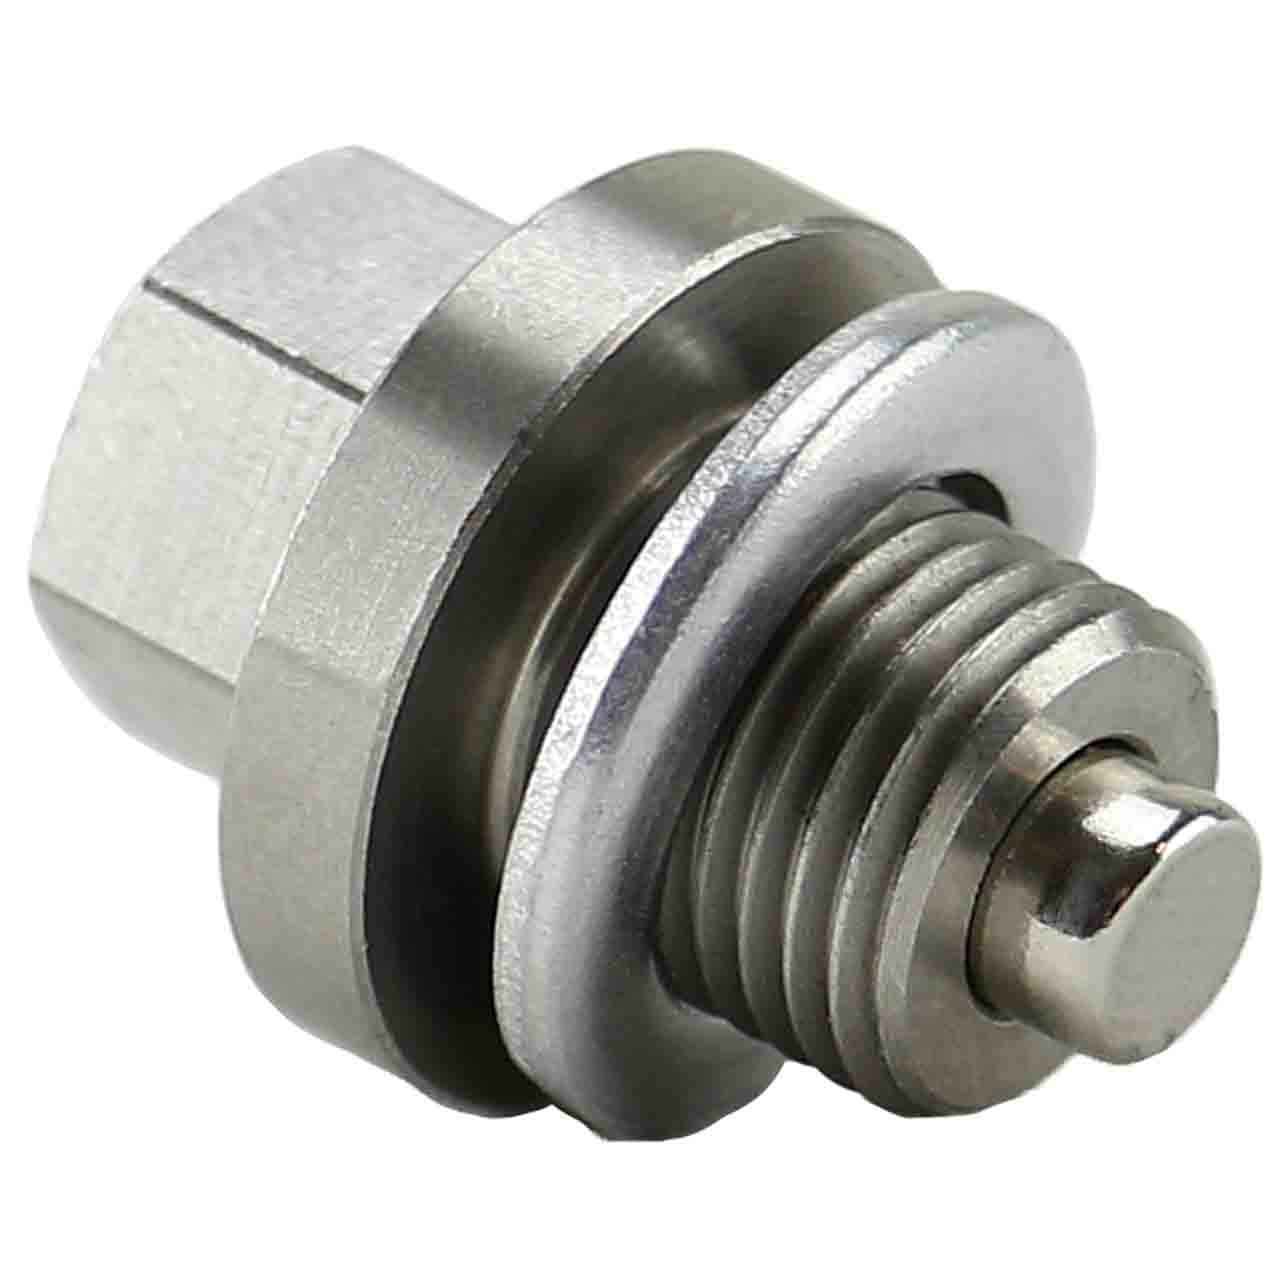 24-11-7-551-084 for Mini - Stainless Steel Magnetic Oil Drain Plug with Neodymium Magnet - Made In USA